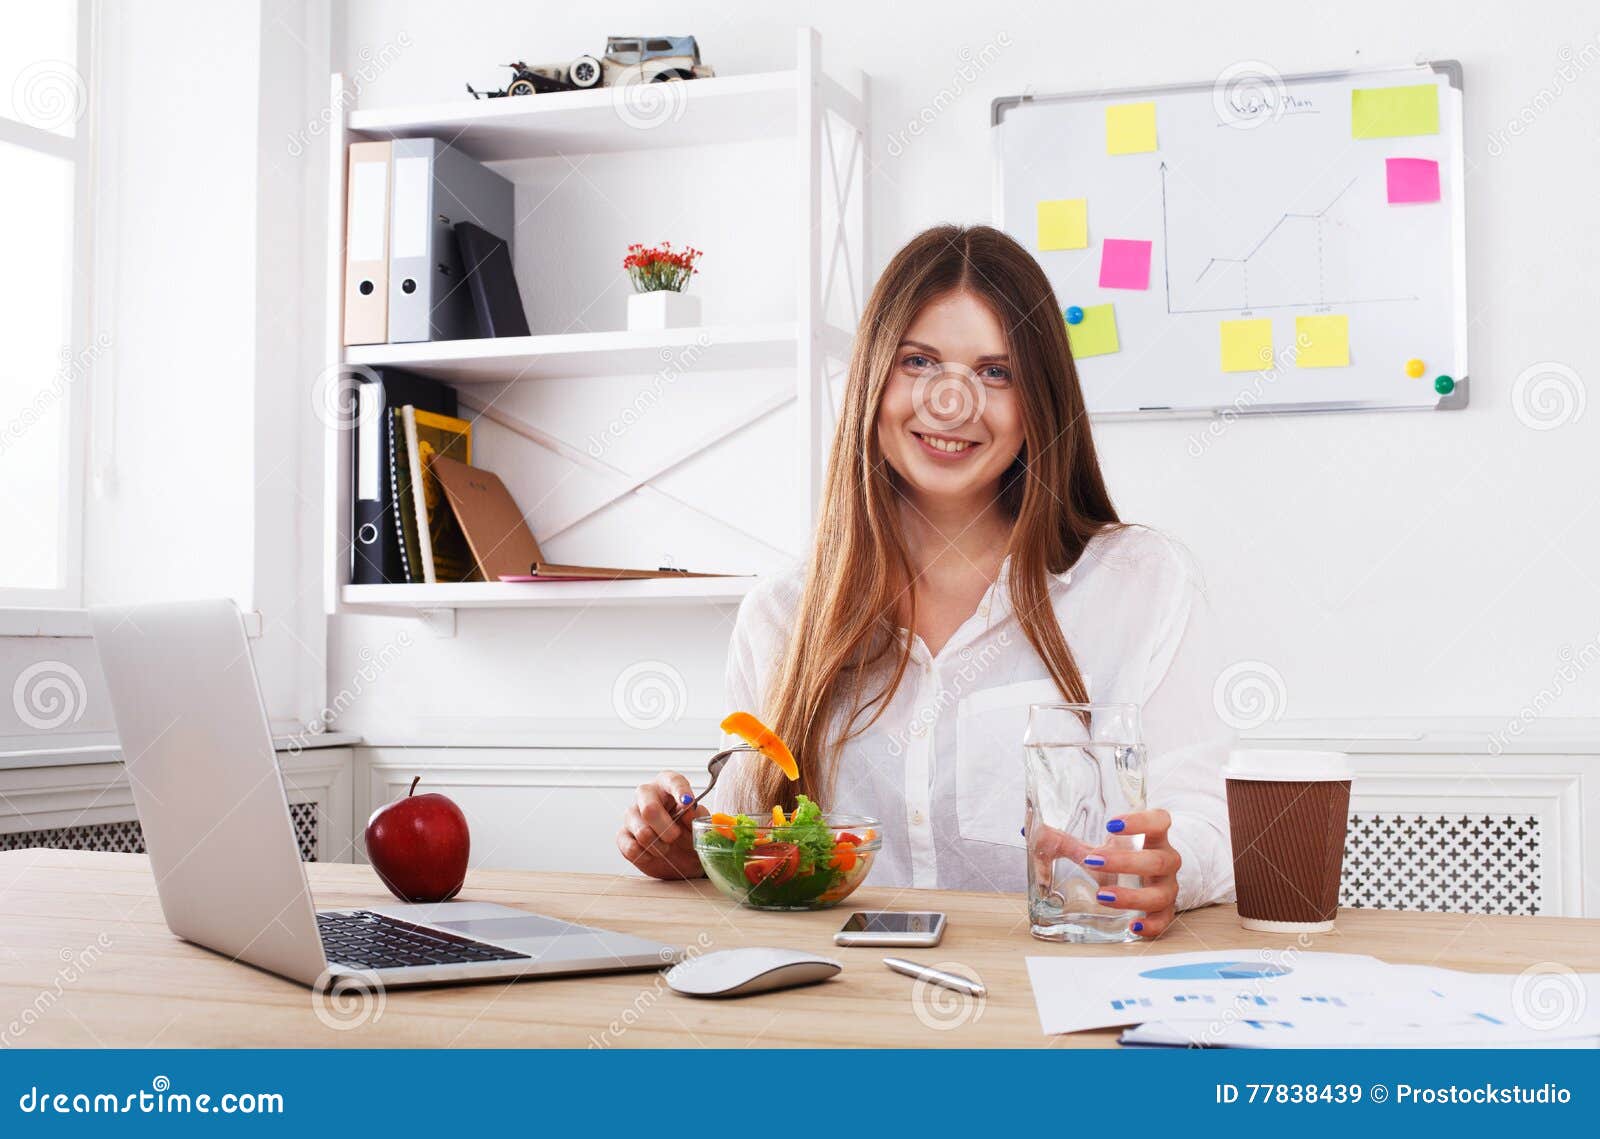 Woman Has Healthy Business Lunch in Modern Office Interior Stock Image ...